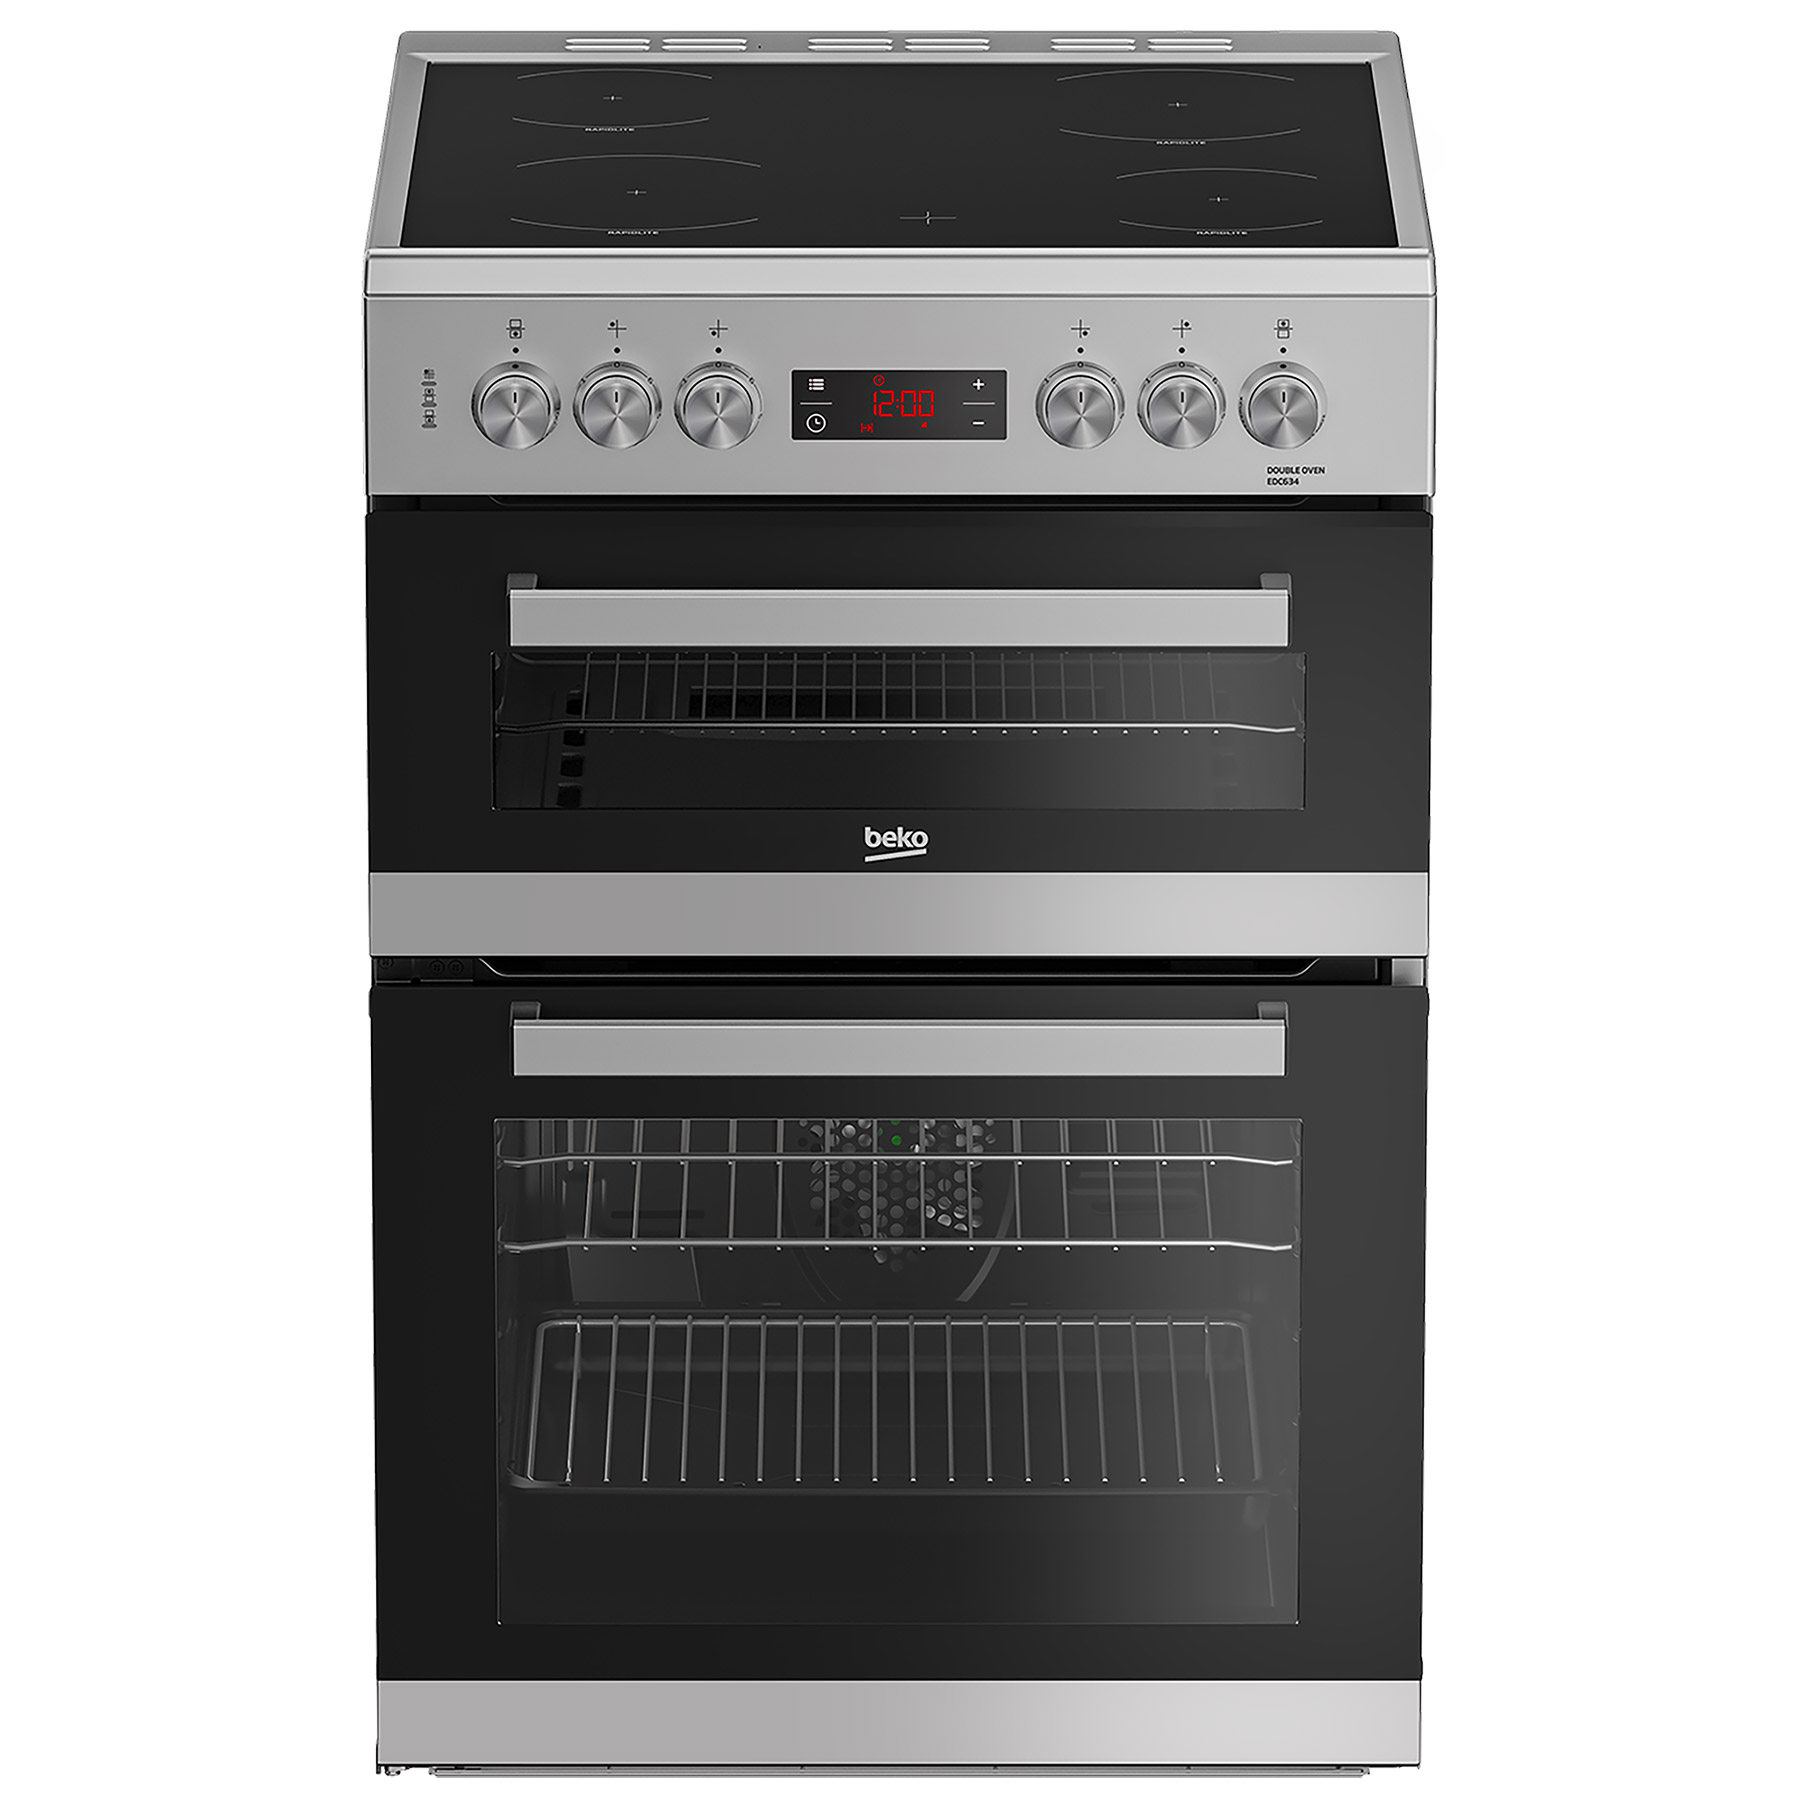 Image of Beko EDC634S 60cm Double Oven Electric Cooker in Silver Ceramic Hob